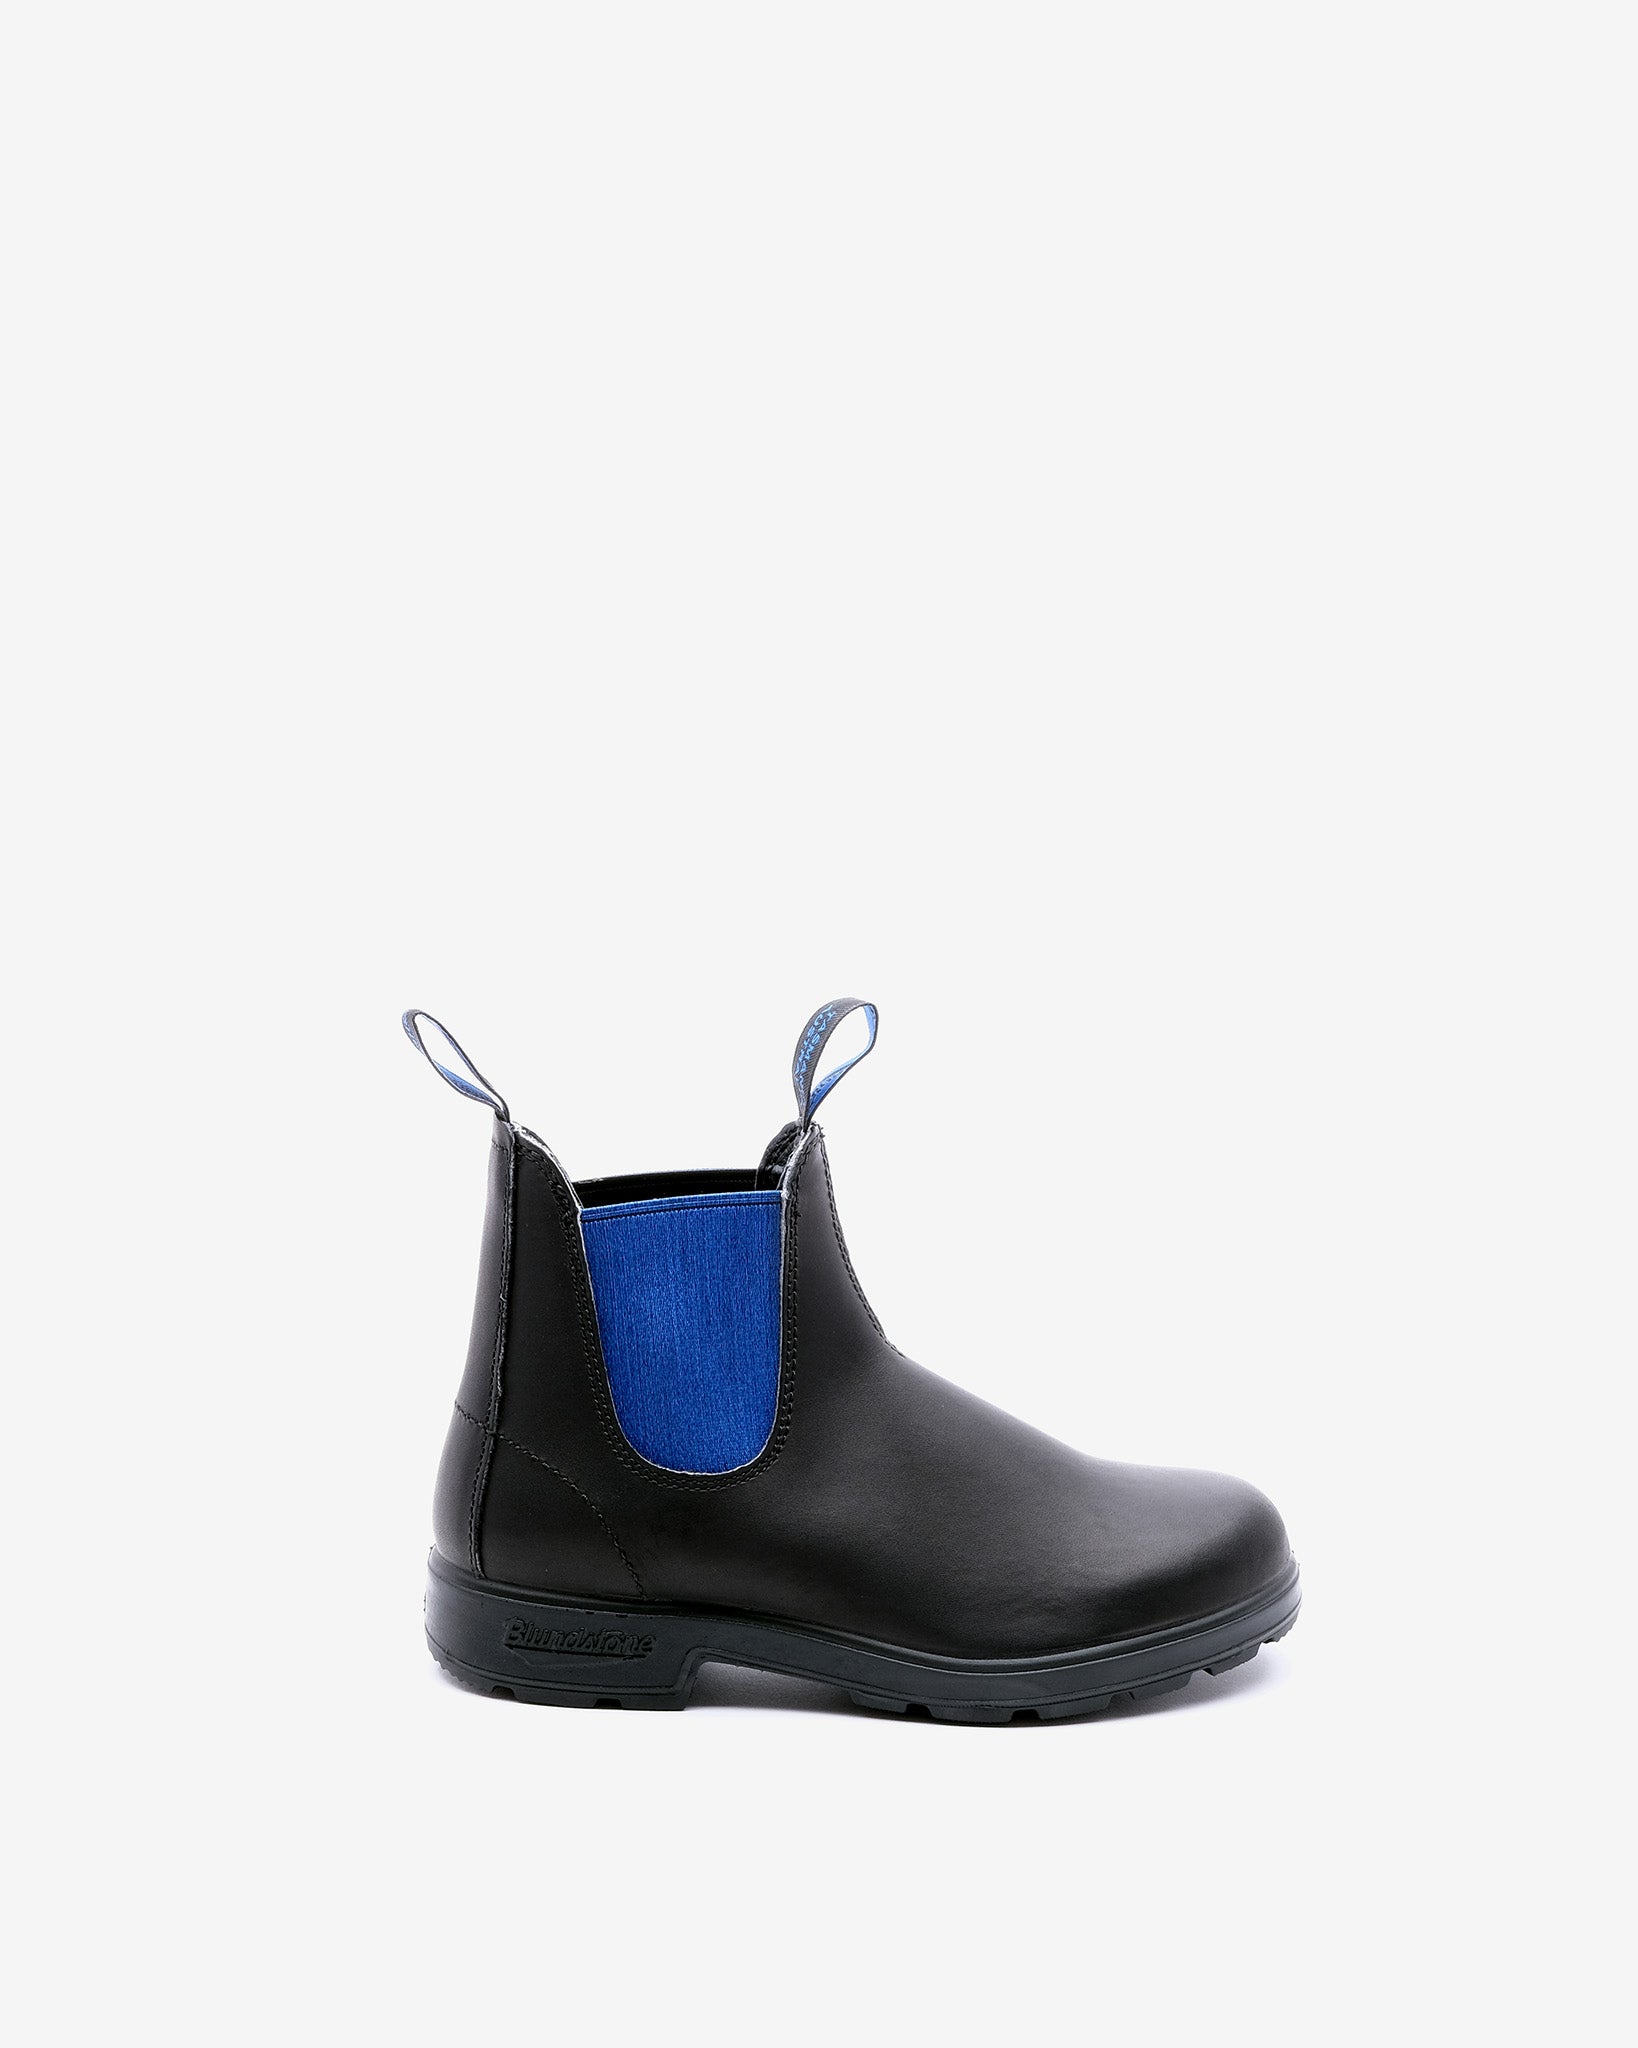 515 Black/Blue Leather Boots